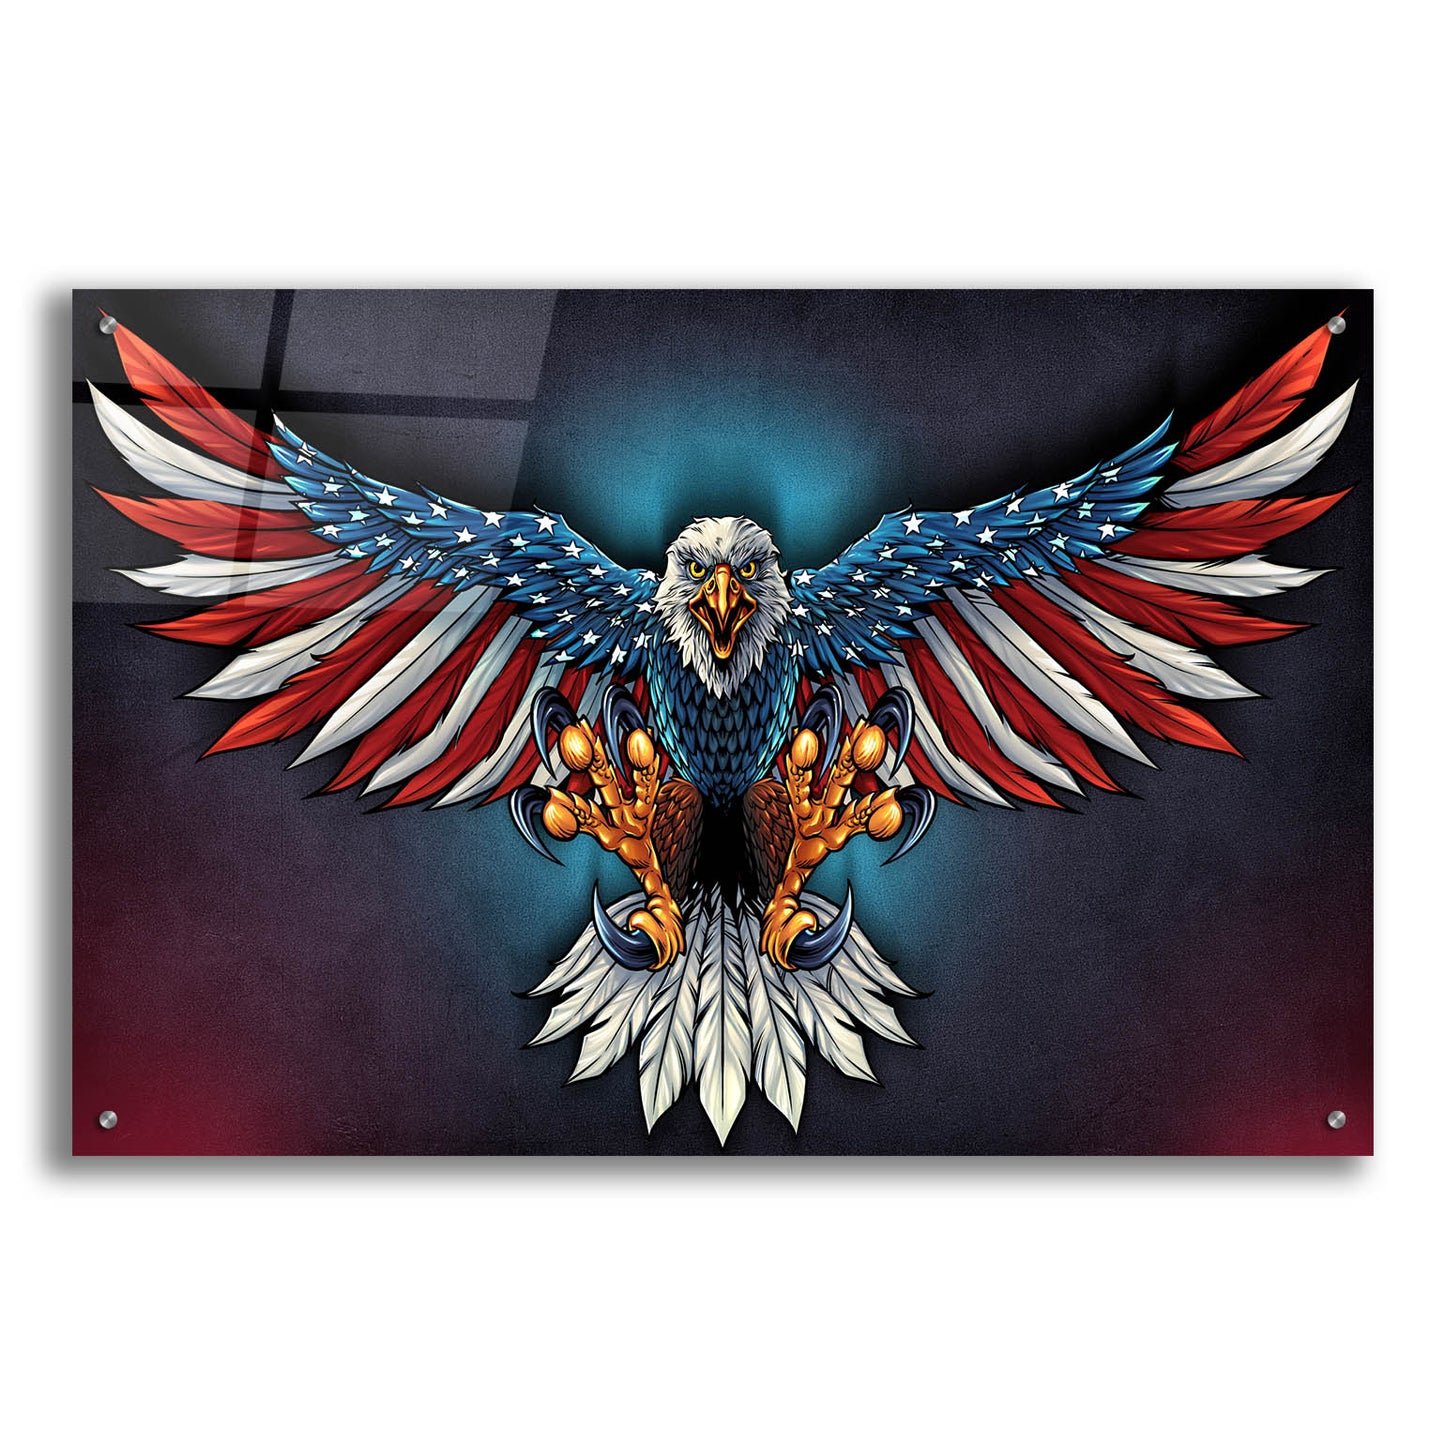 Epic Art 'Eagle With US Flag Wings Spread' by Flyland Designs, Acrylic Glass Wall Art,36x24